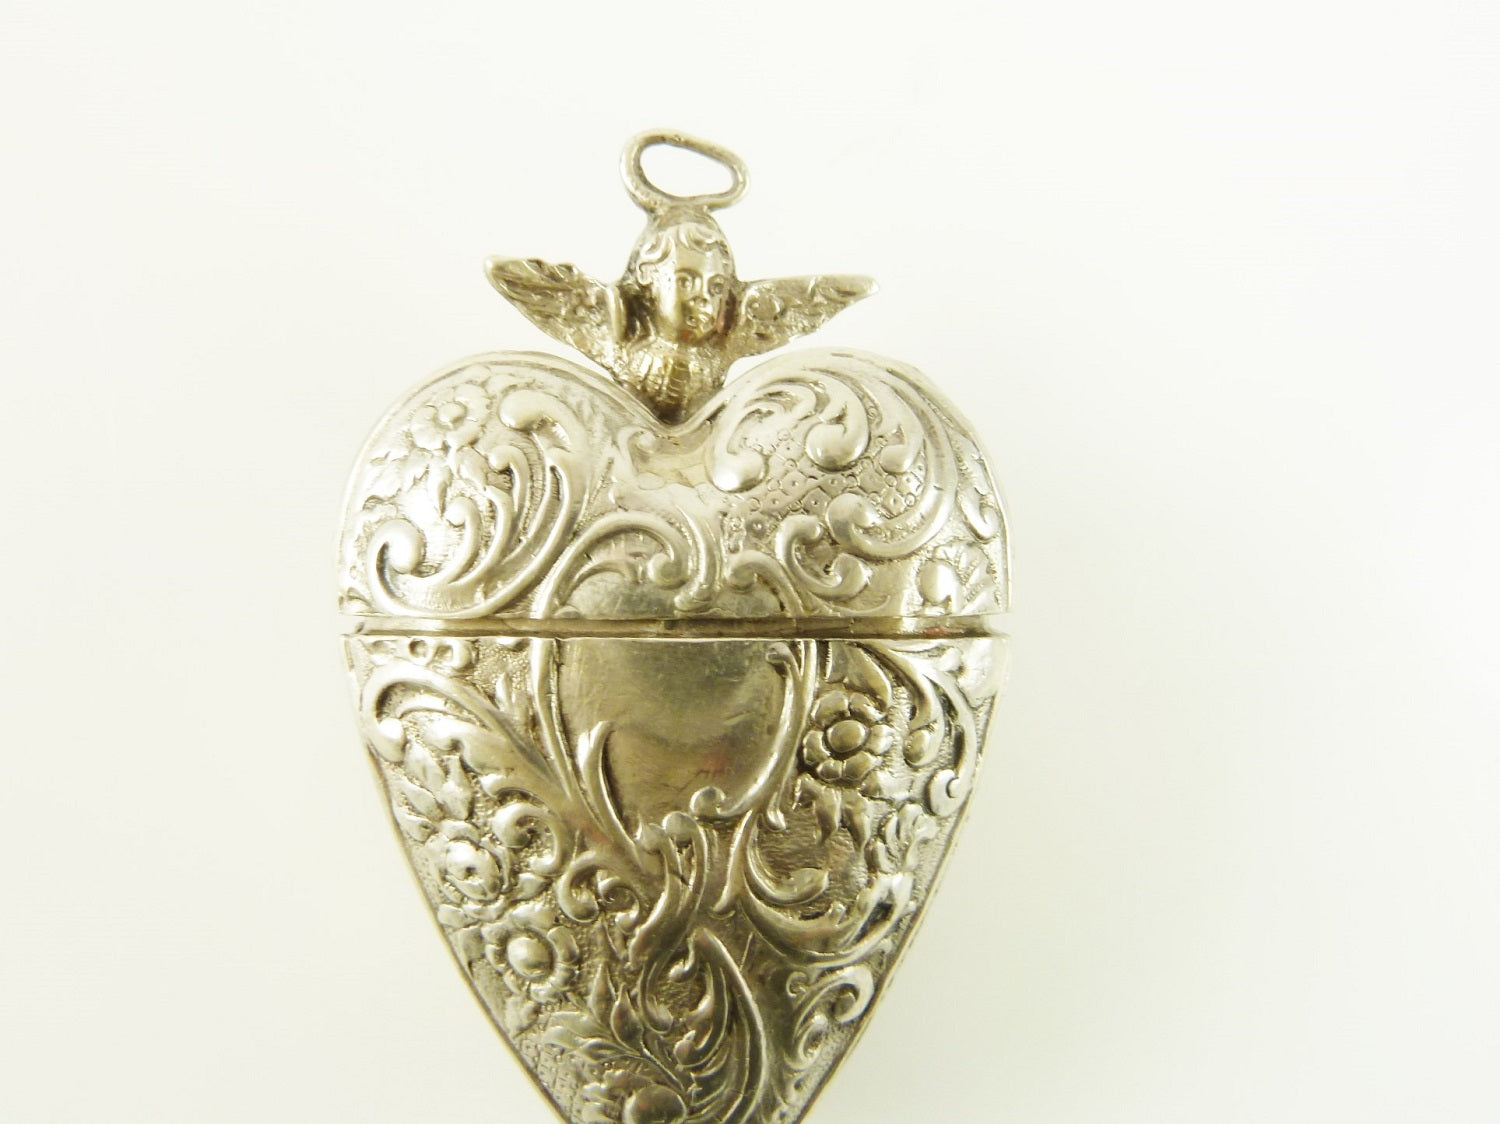 Antique French Silver Locket, Heart Shaped with Angel or Cherub Face C 1880 - 43 Chesapeake Court Antiques